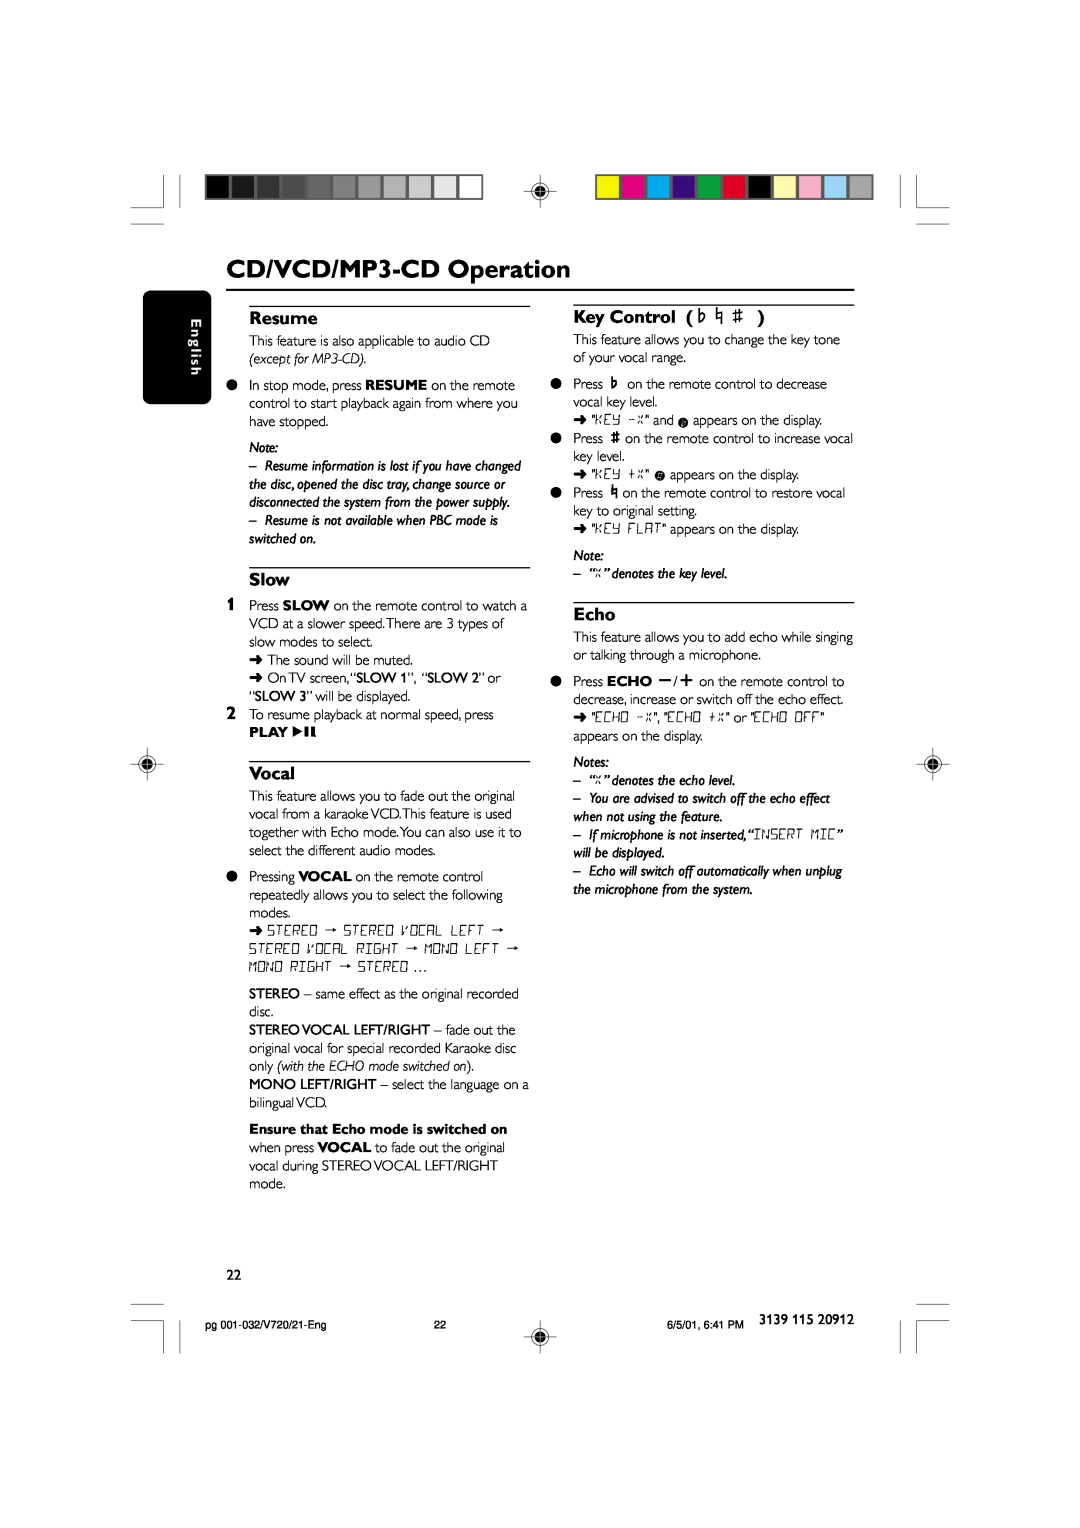 Philips FW-V720 manual Resume, CD/VCD/MP3-CDOperation, except for MP3-CD, Playéå, Ensure that Echo mode is switched on 